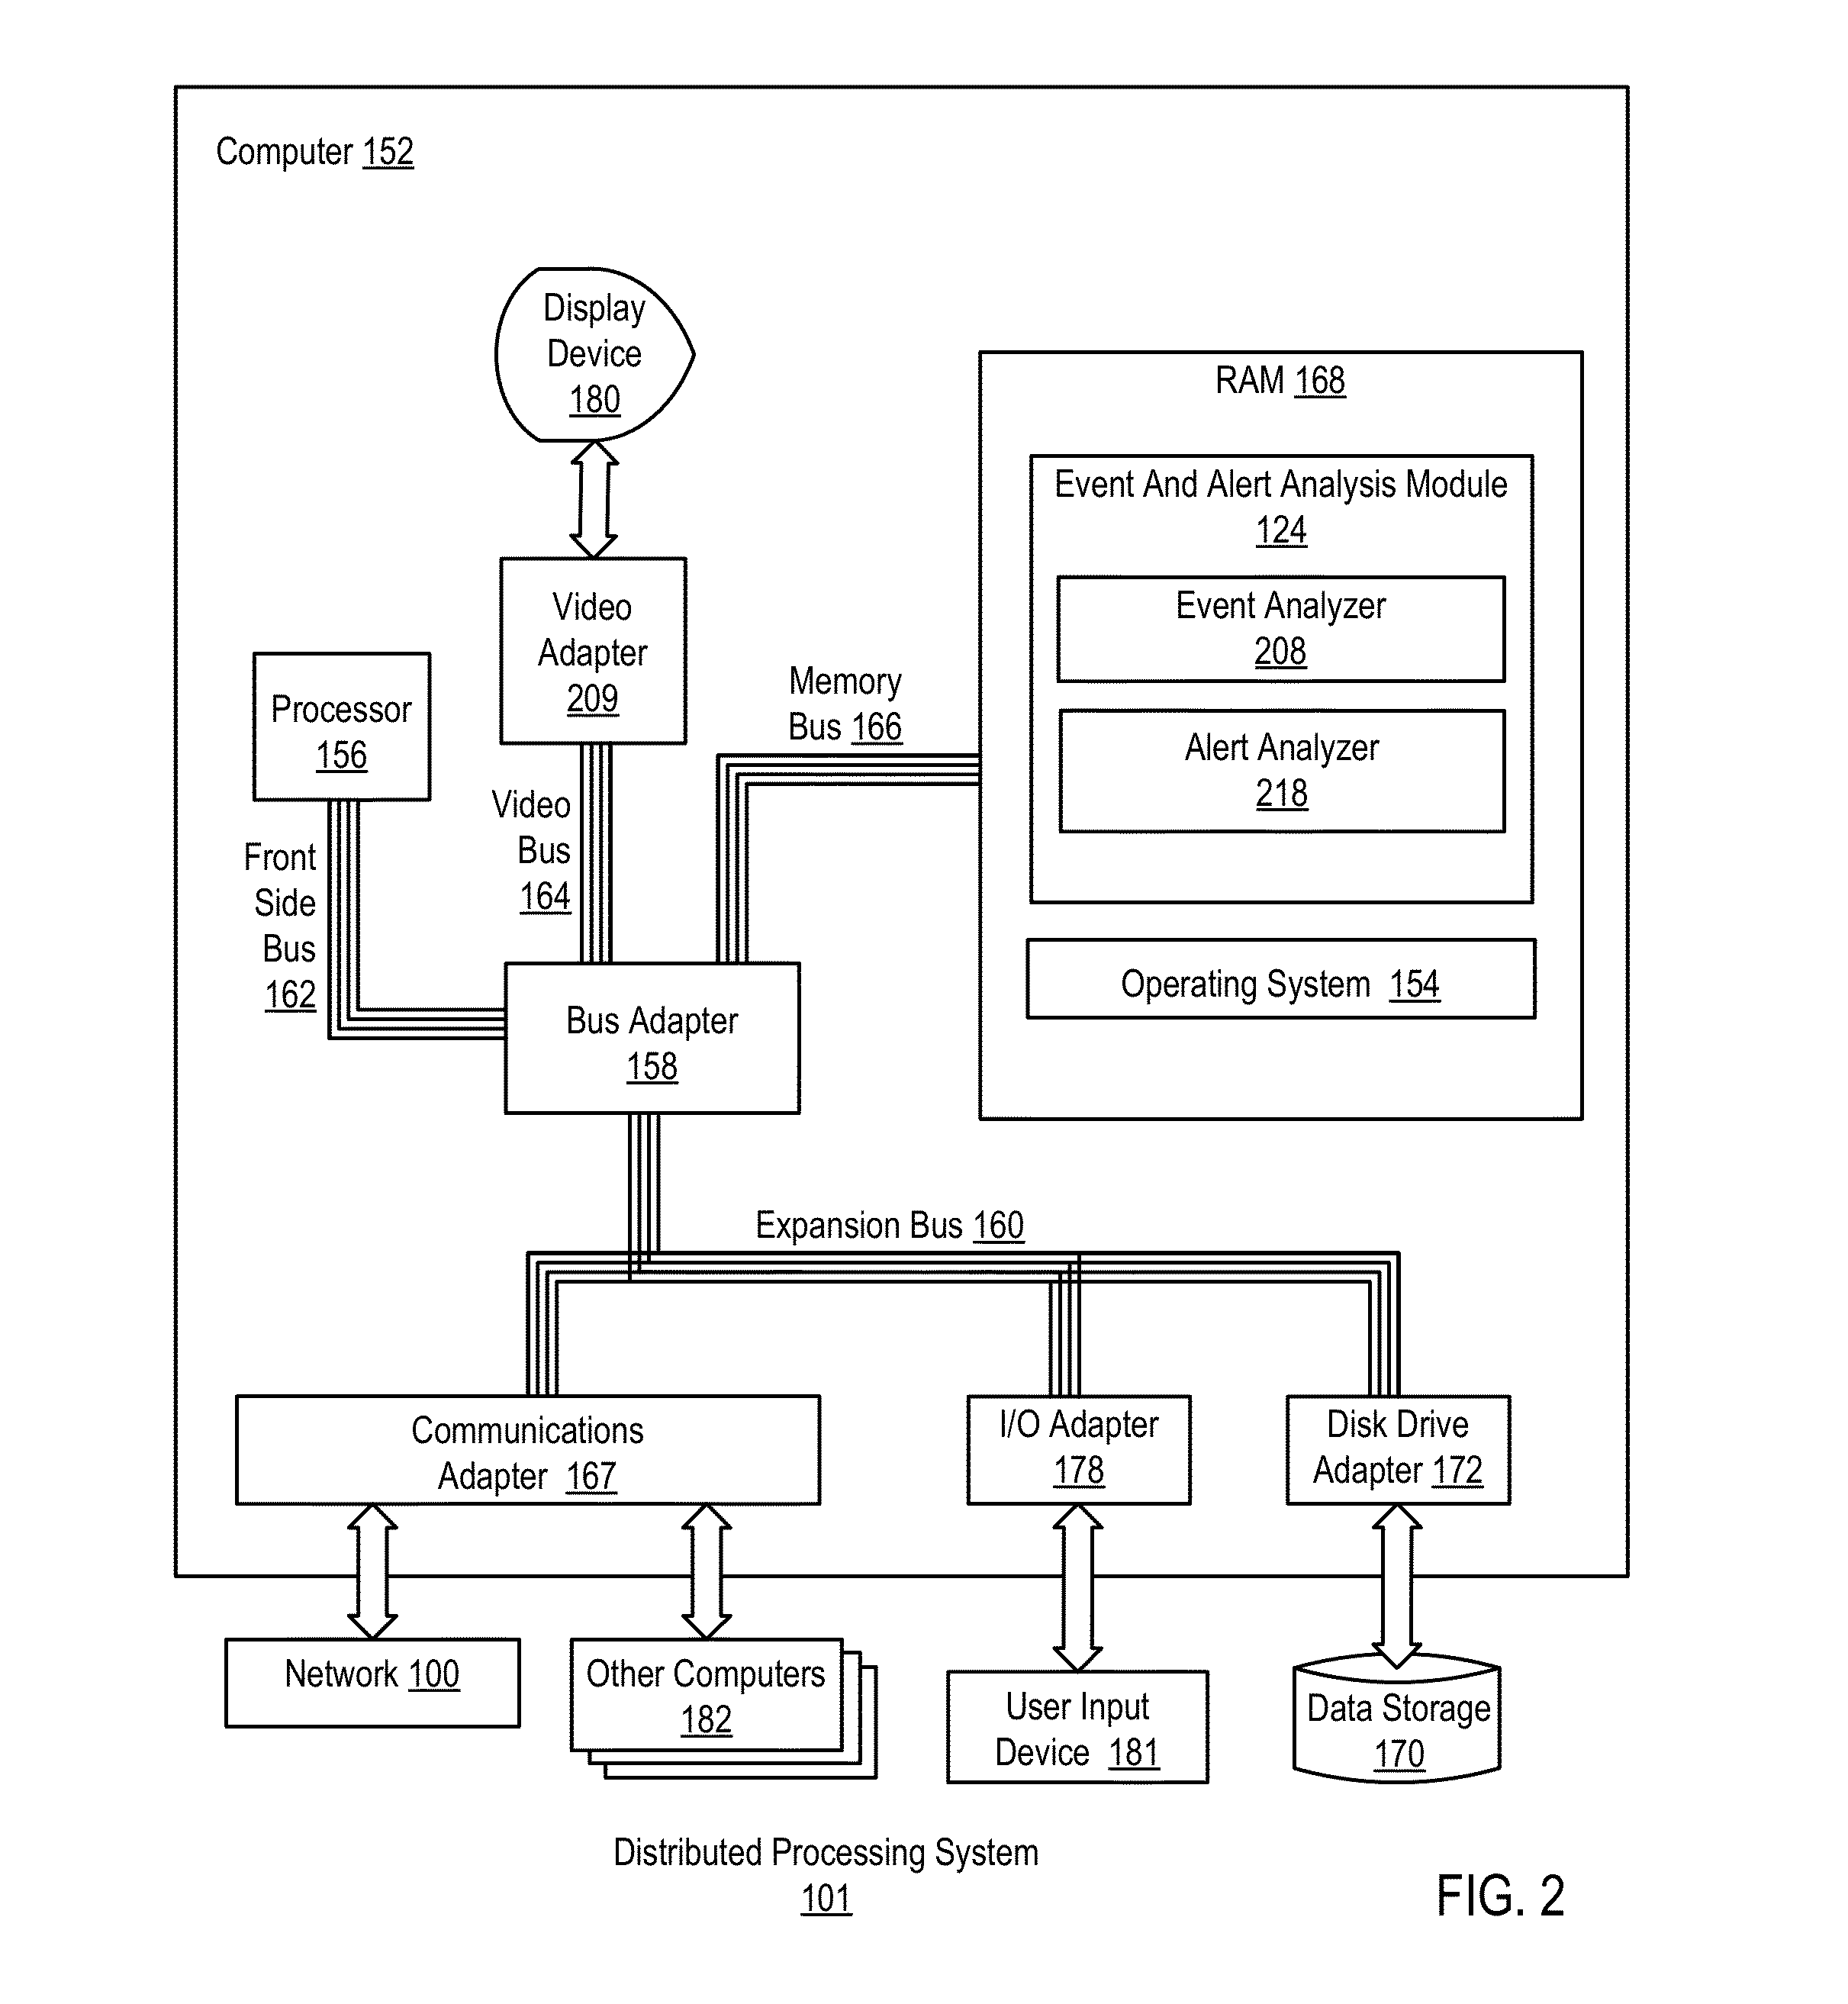 Dynamic administration of component event reporting in a distributed processing system